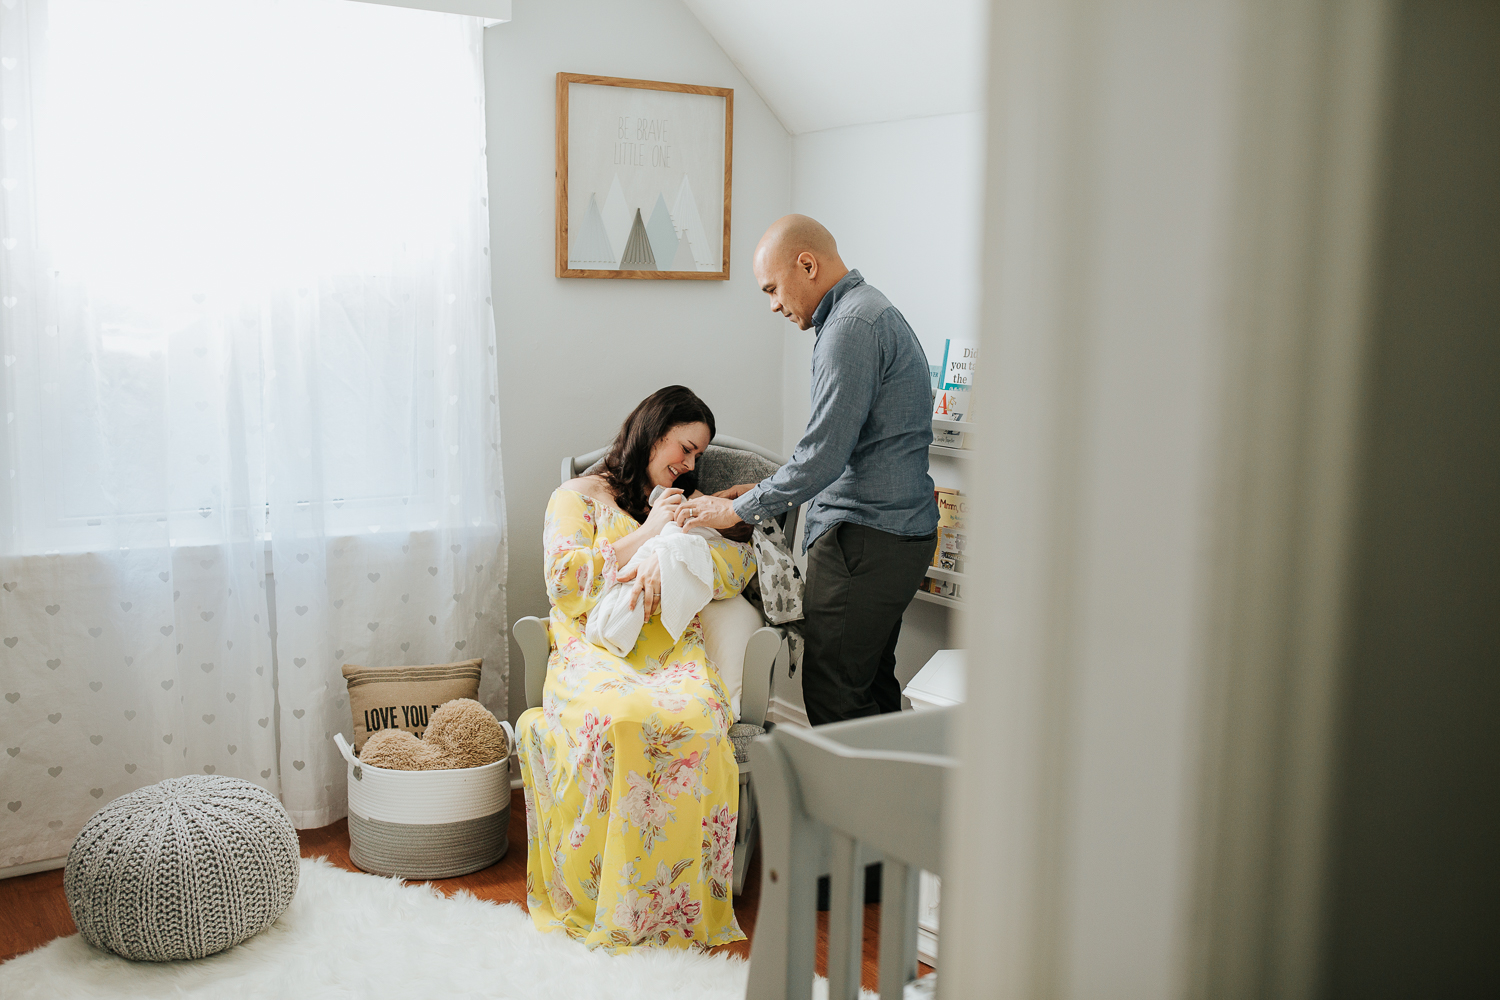 new mom in yellow dress sitting in nursery rocker feeding 3 week old baby boy his bottle, father standing next to chair holding son's hand - GTA Lifestyle Photography